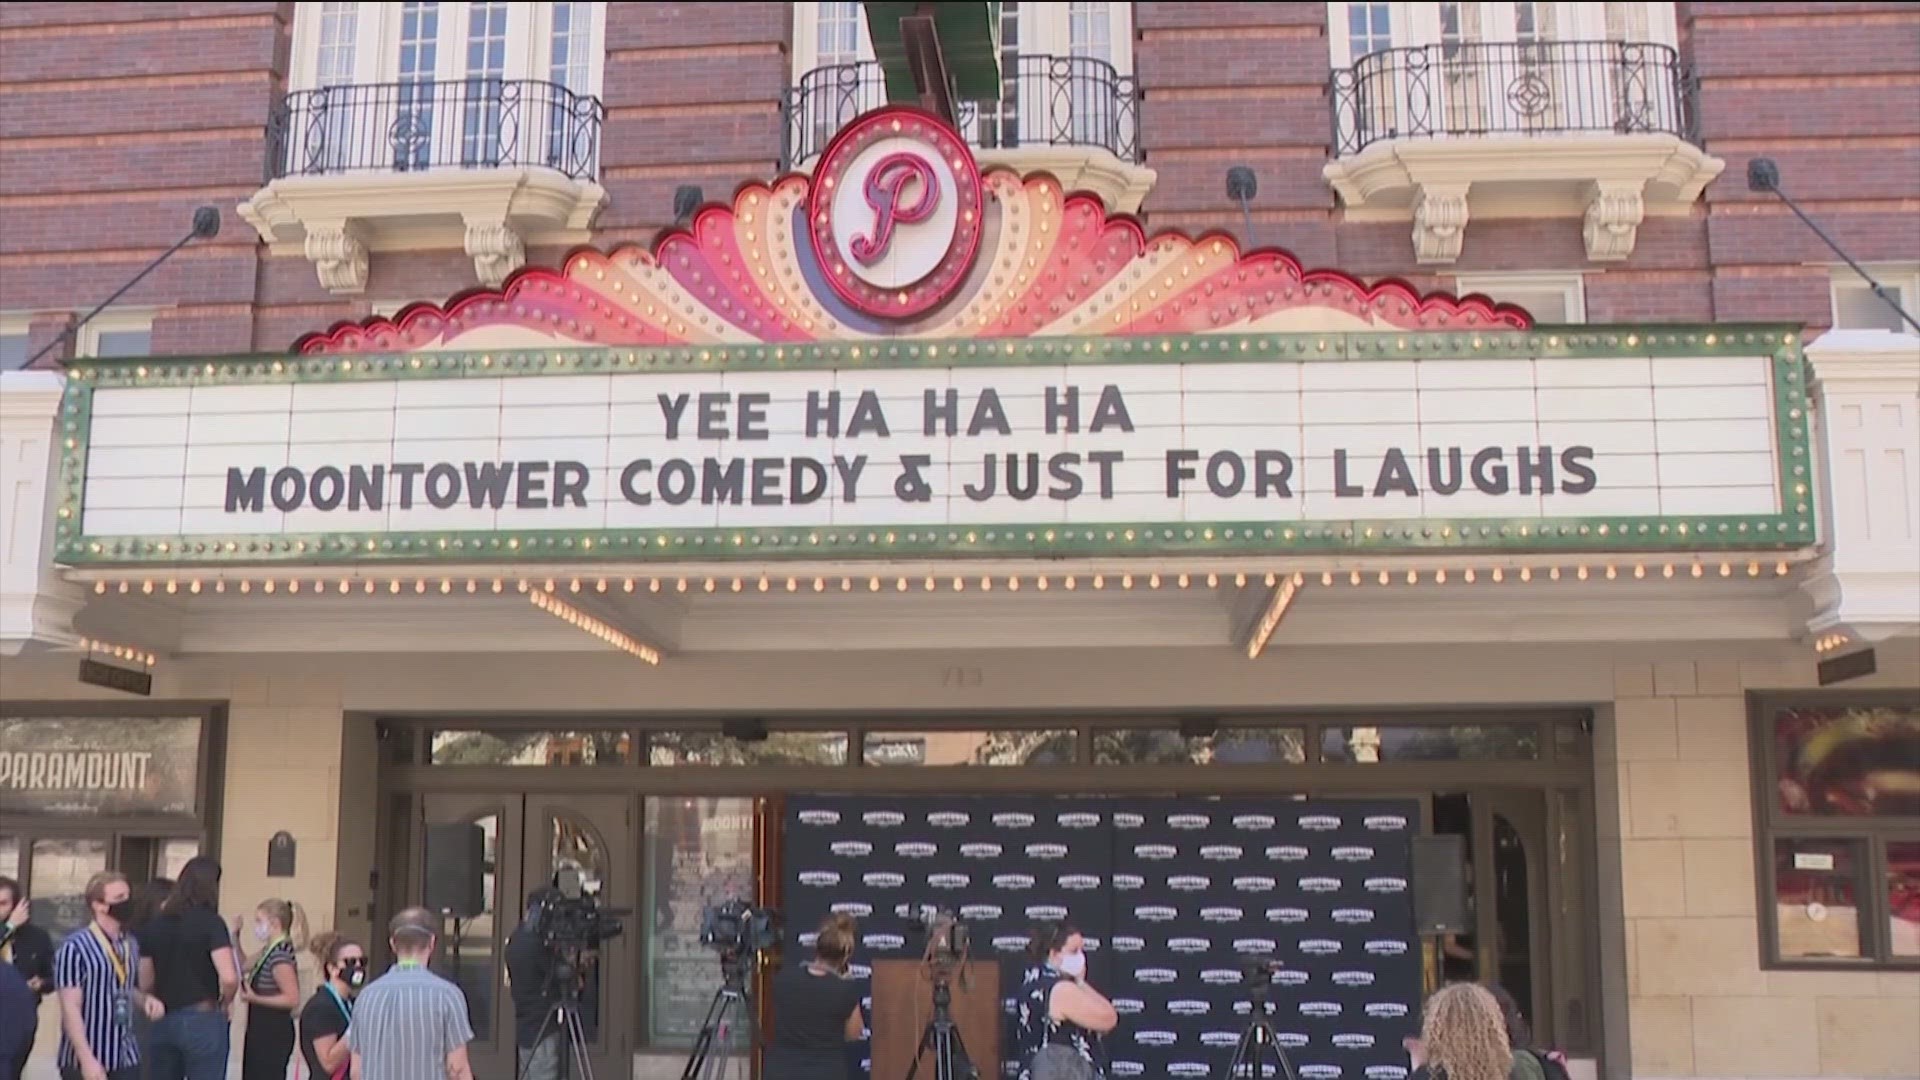 Attendees can expect to see stand-up comedy, sketches, original shows and more.